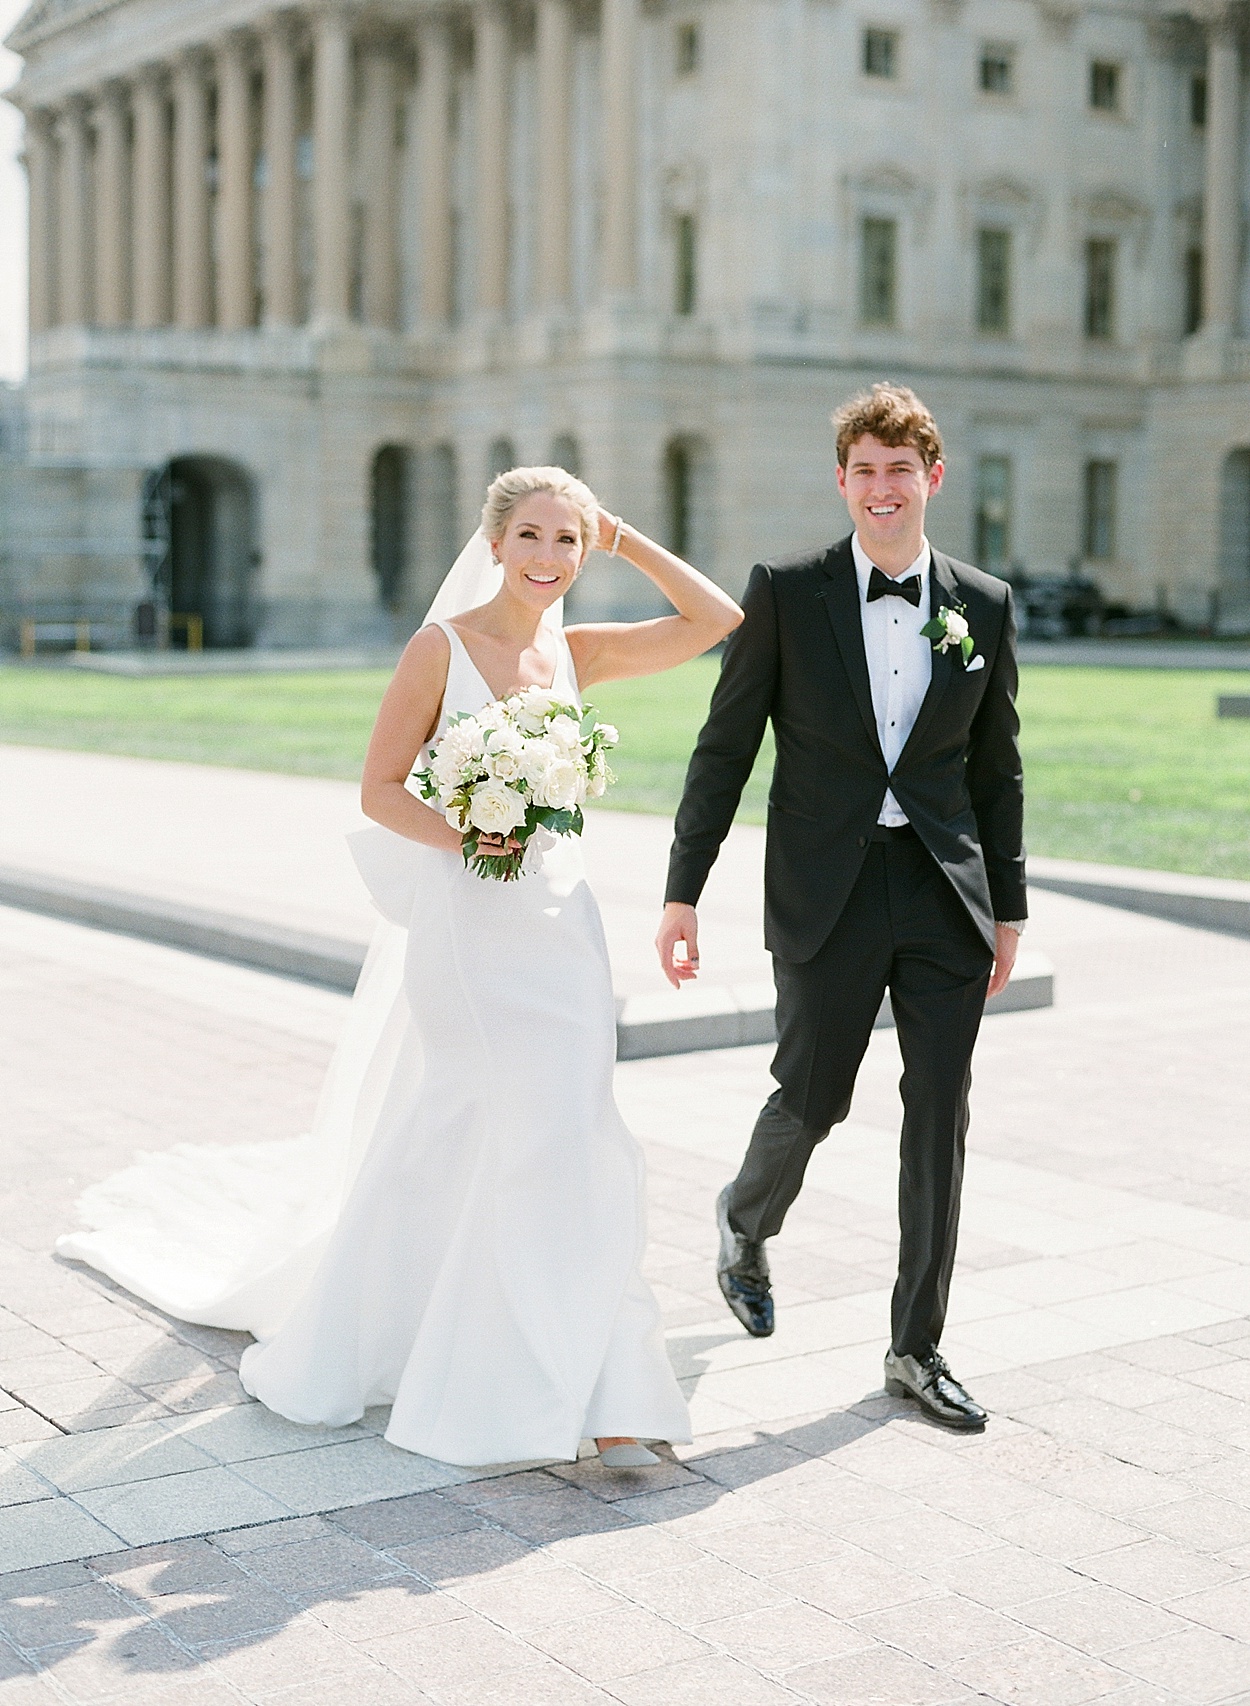 DC wedding portraits at the US Capitol | Abby Grace Photography